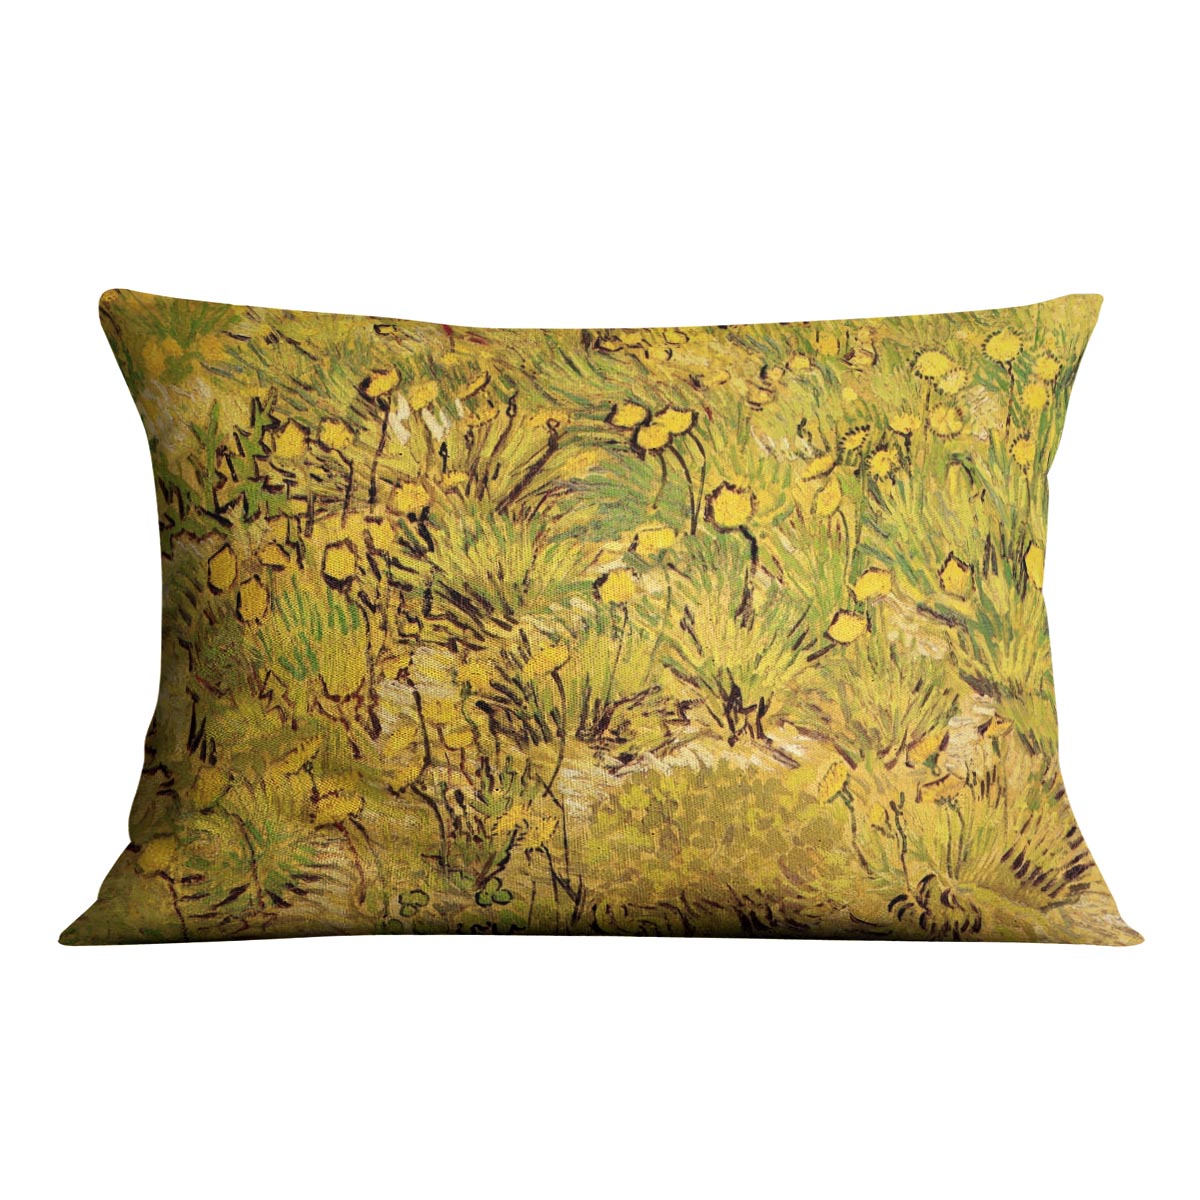 A Field of Yellow Flowers by Van Gogh Cushion